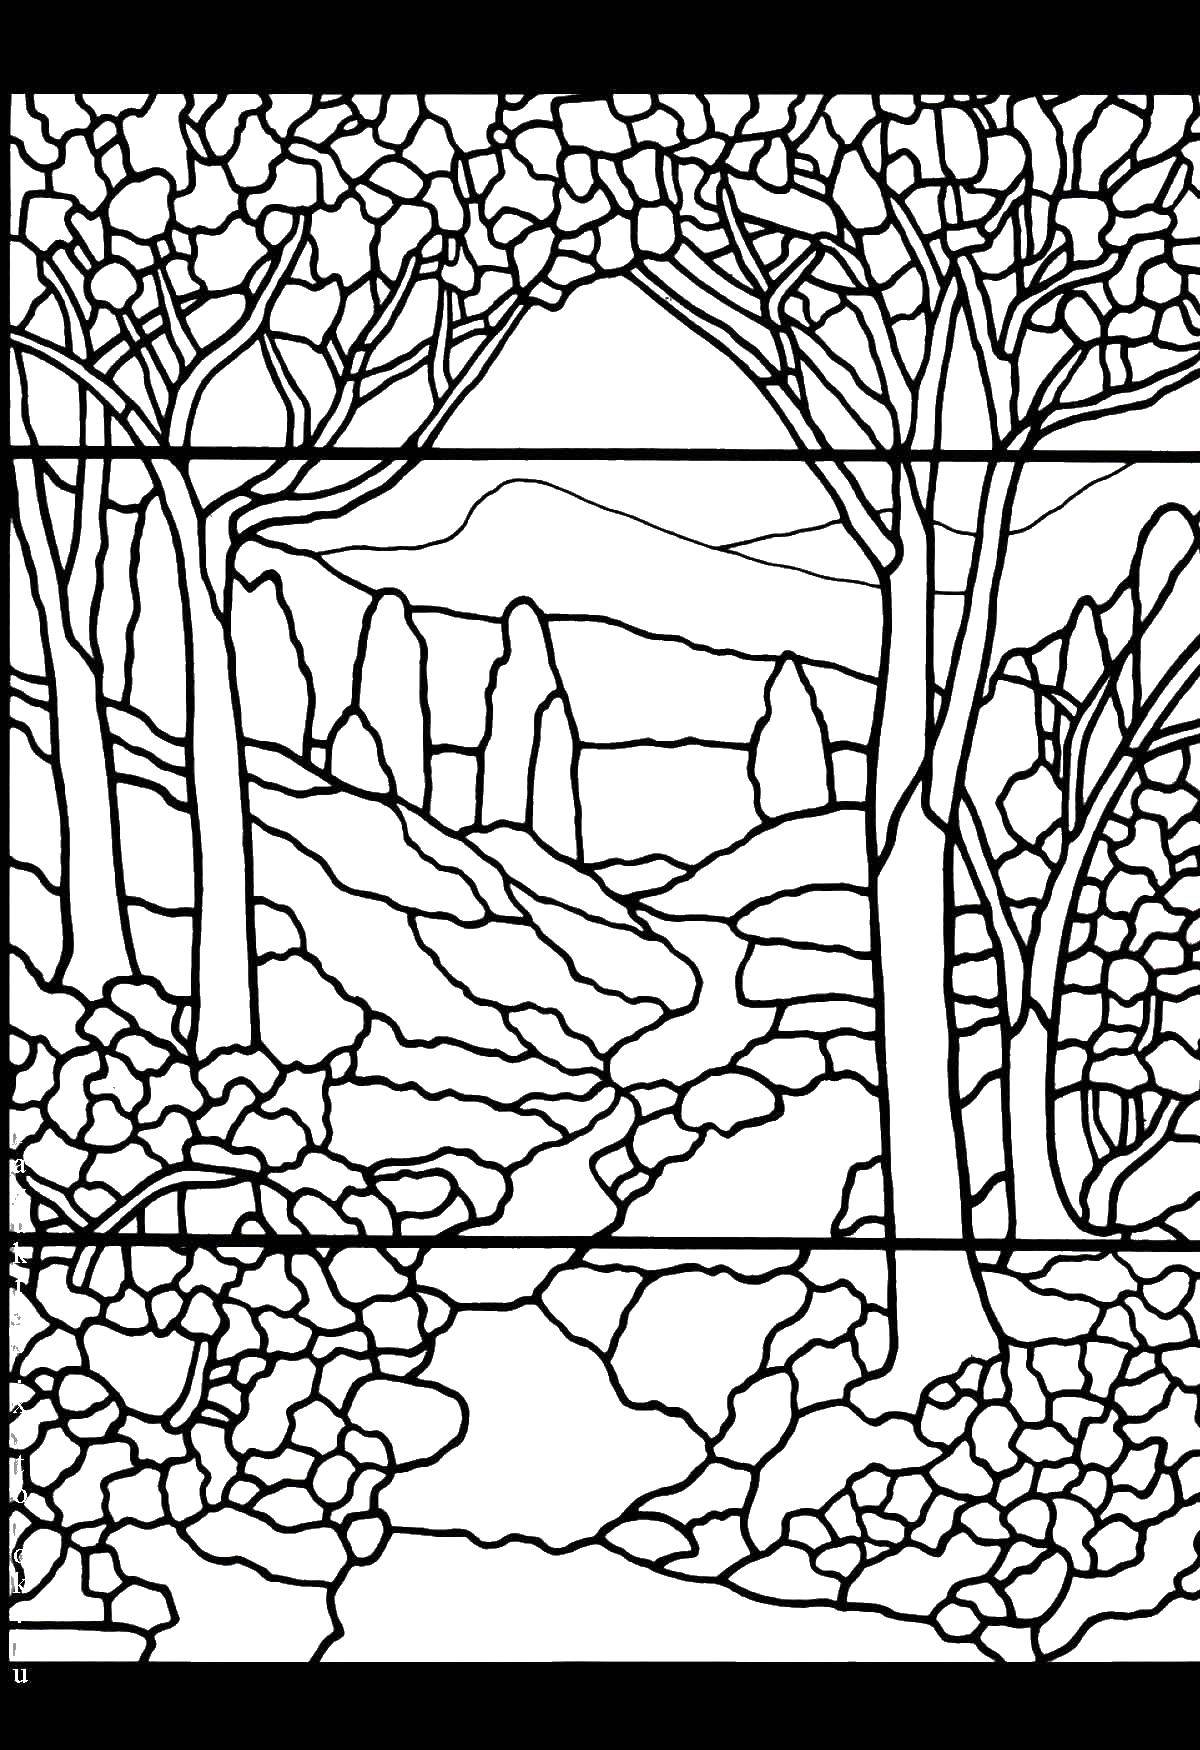 Coloring Trees. Category stained glass. Tags:  stained glass, wood, flowers.